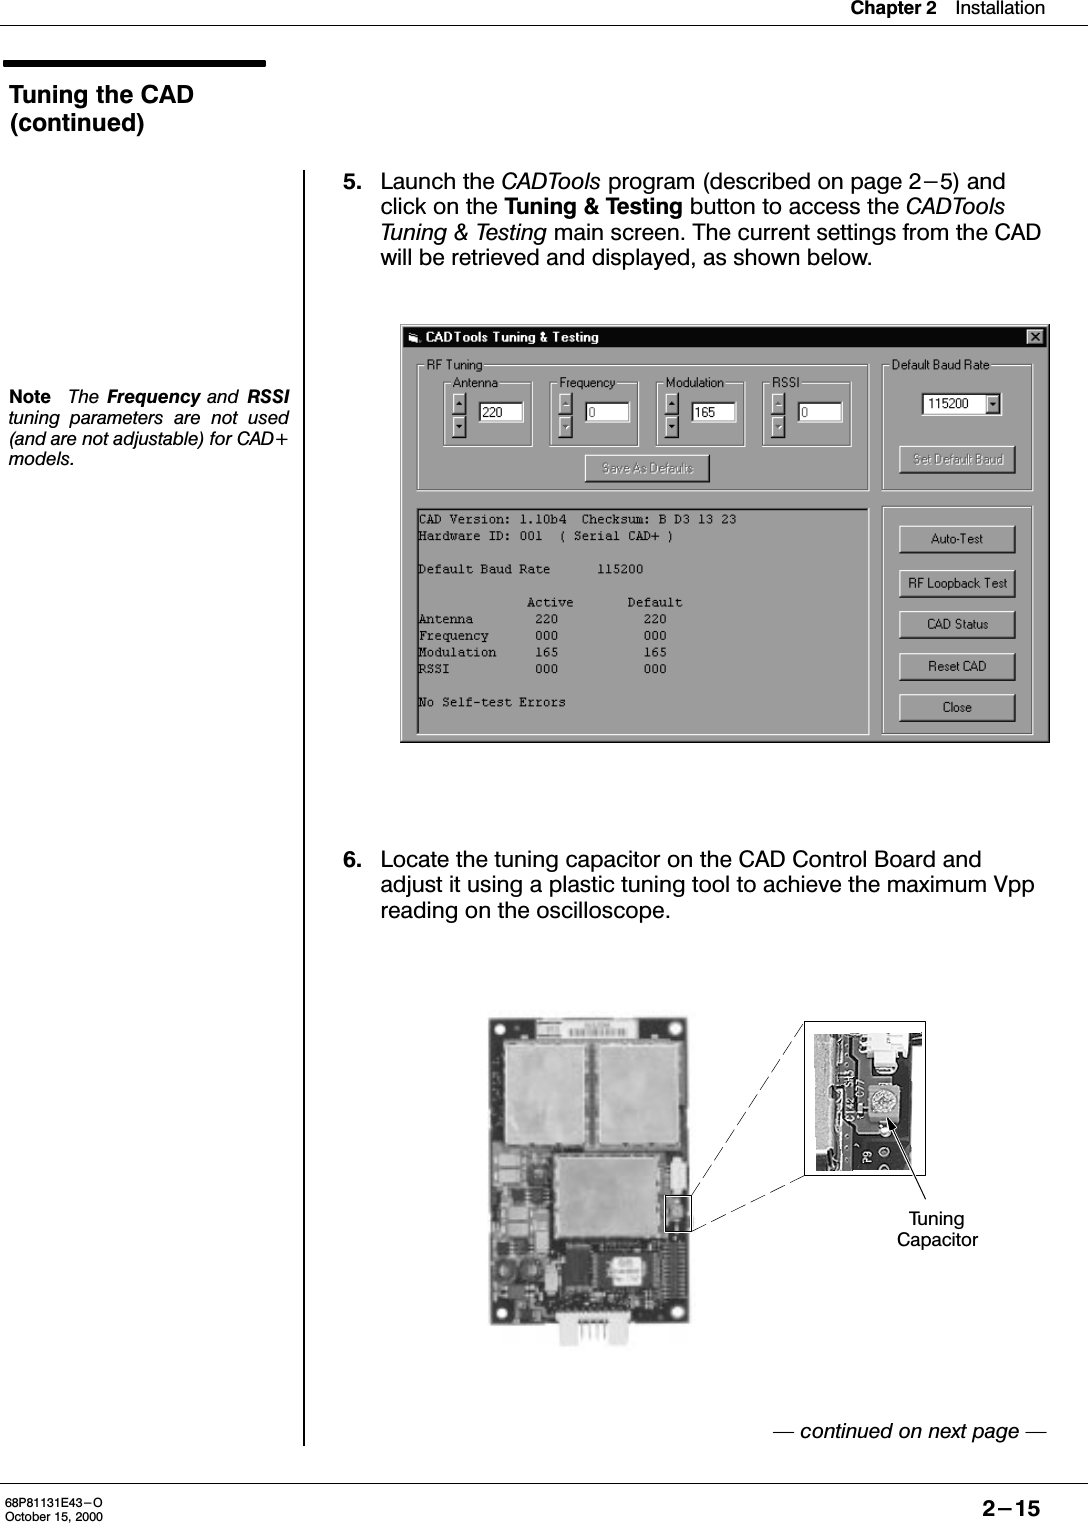 Chapter 2Installation2-1568P81131E43-OOctober 15, 2000Tuning the CAD(continued)NoteThe  Frequency and RSSItuning parameters are not used(and are not adjustable) for CAD+models.5. Launch the CADTools program (described on page 2-5) andclick on the Tuning &amp; Testing button to access the CADToolsTuning &amp; Testing main screen. The current settings from the CADwill be retrieved and displayed, as shown below.6. Locate the tuning capacitor on the CAD Control Board andadjust it using a plastic tuning tool to achieve the maximum Vppreading on the oscilloscope. continued on next page TuningCapacitor